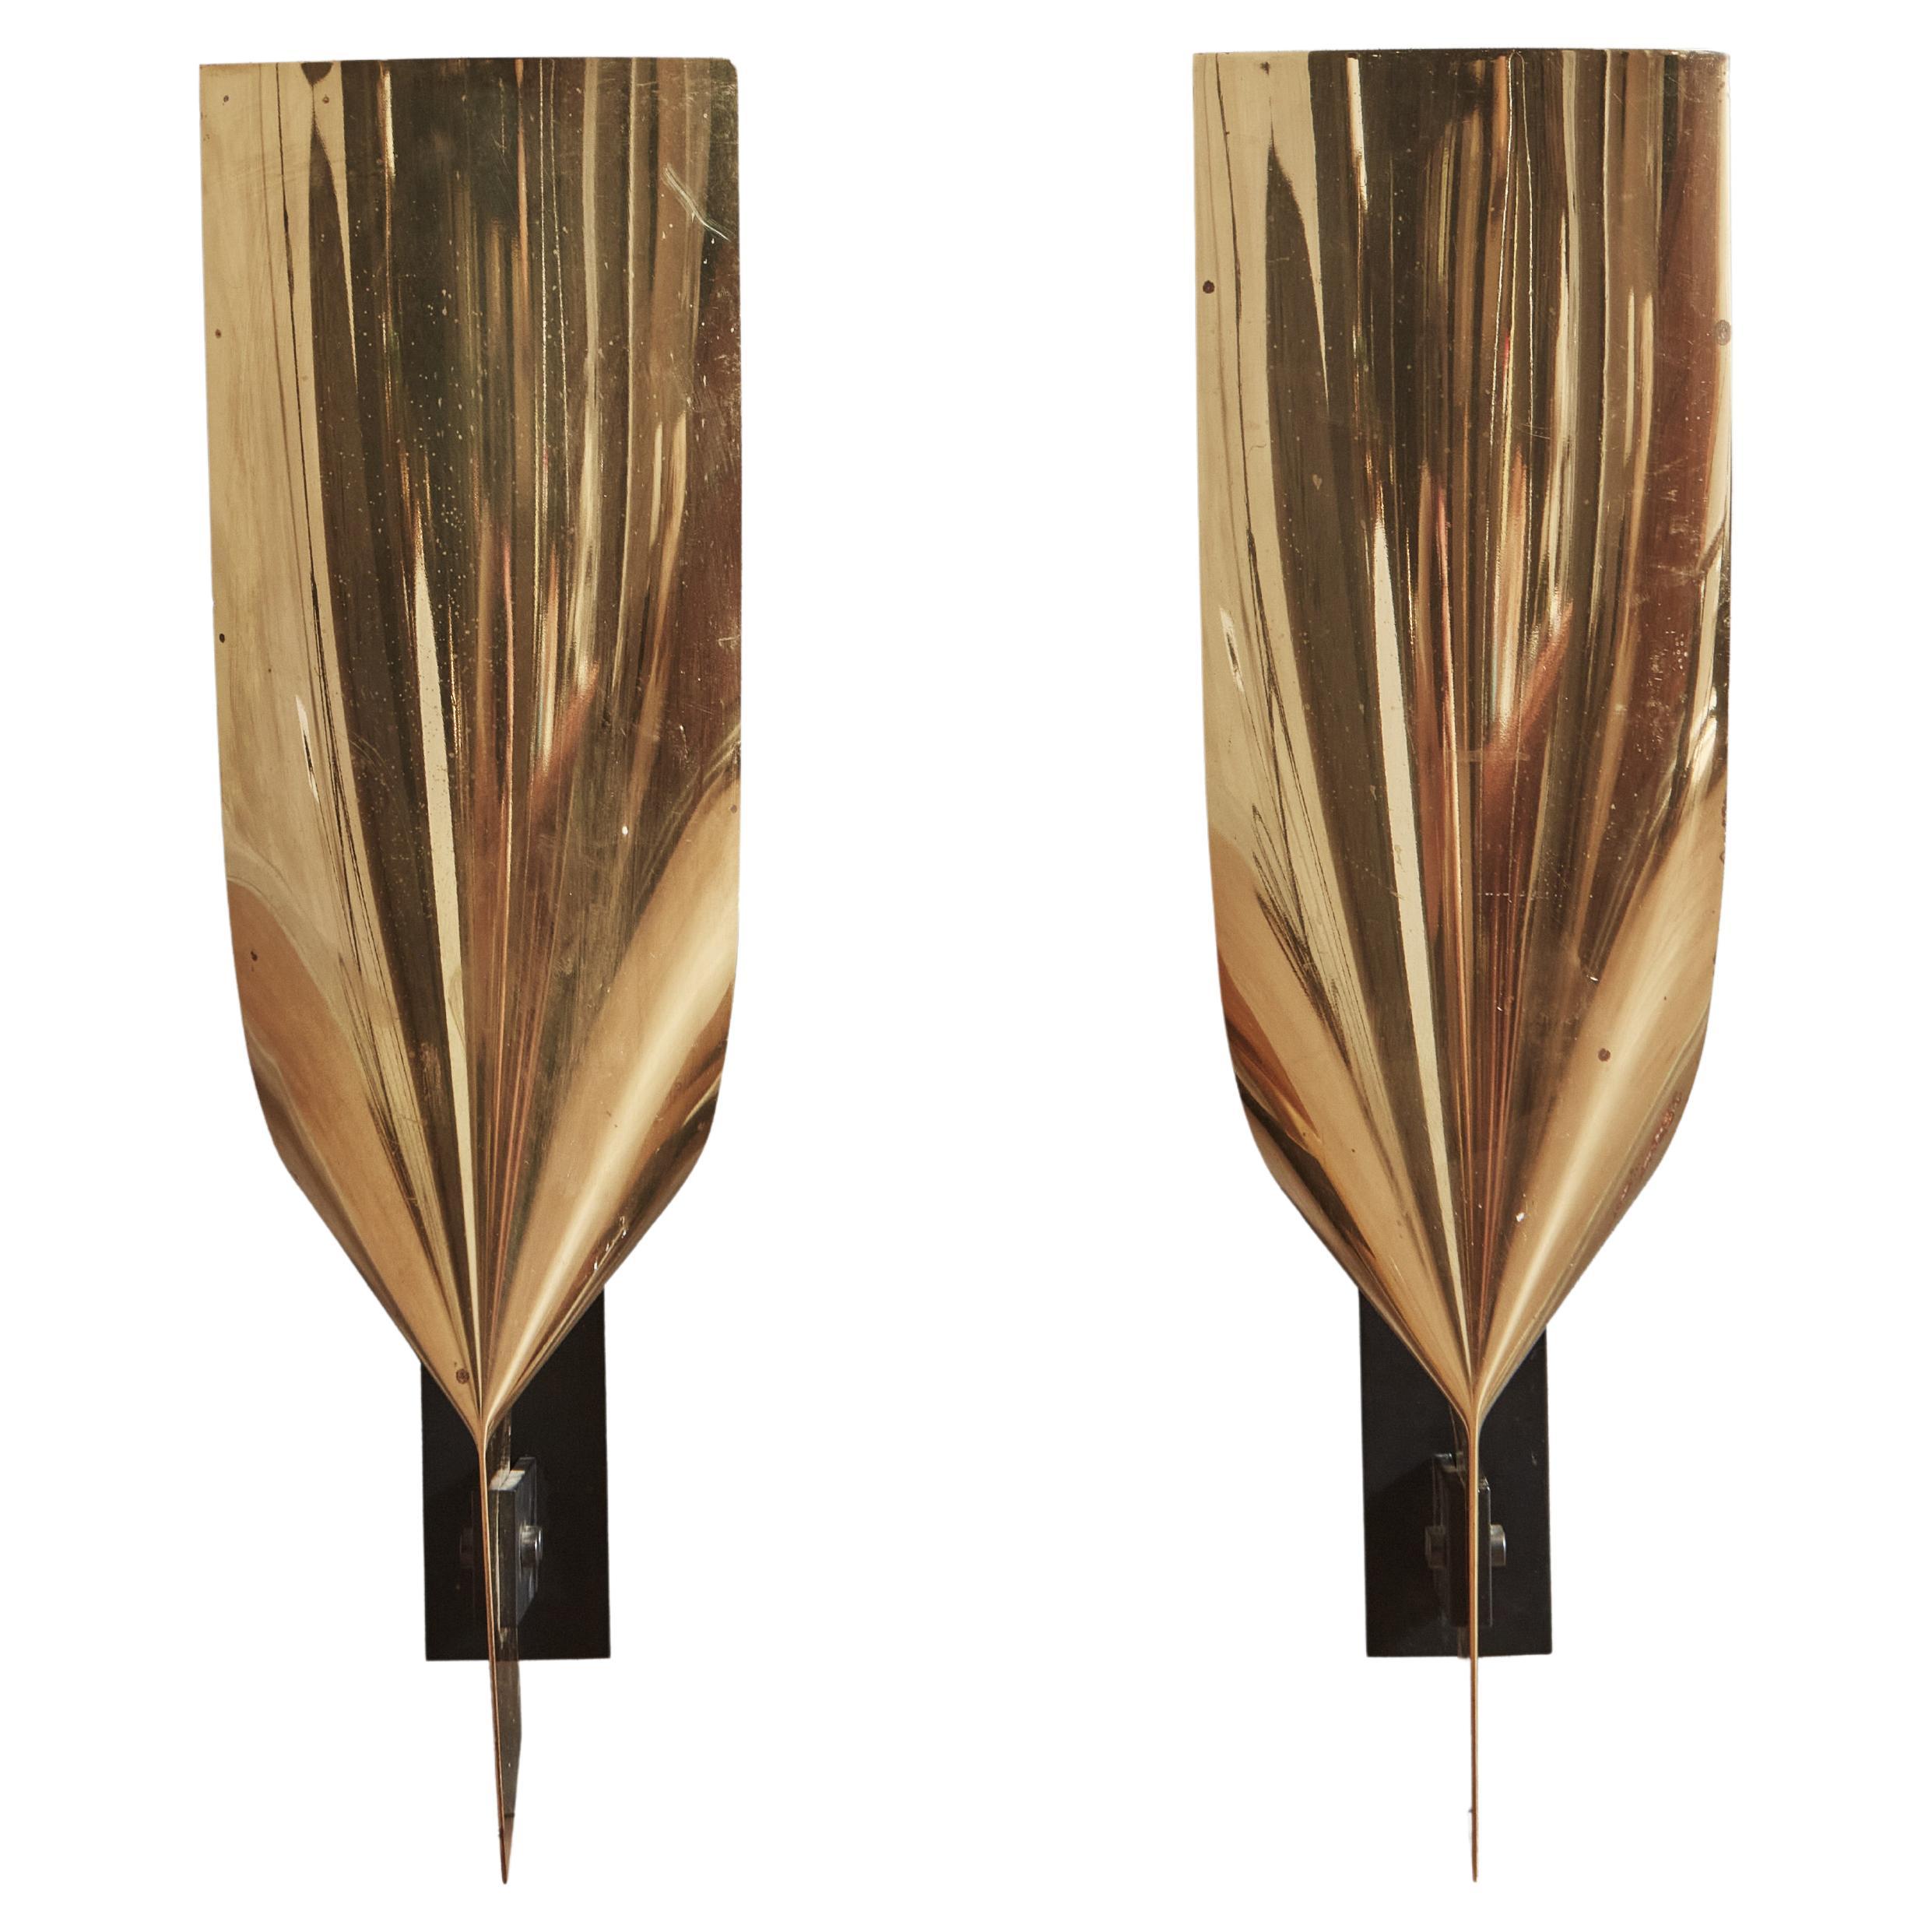 A pair of 1960’s brass wall sconces by Tobias Fraum. Created through the marriage of laquered metal base and brass folded sheet, it follows a tipical mid-century metal processing technique: calendering, a metal bending technique often used to create